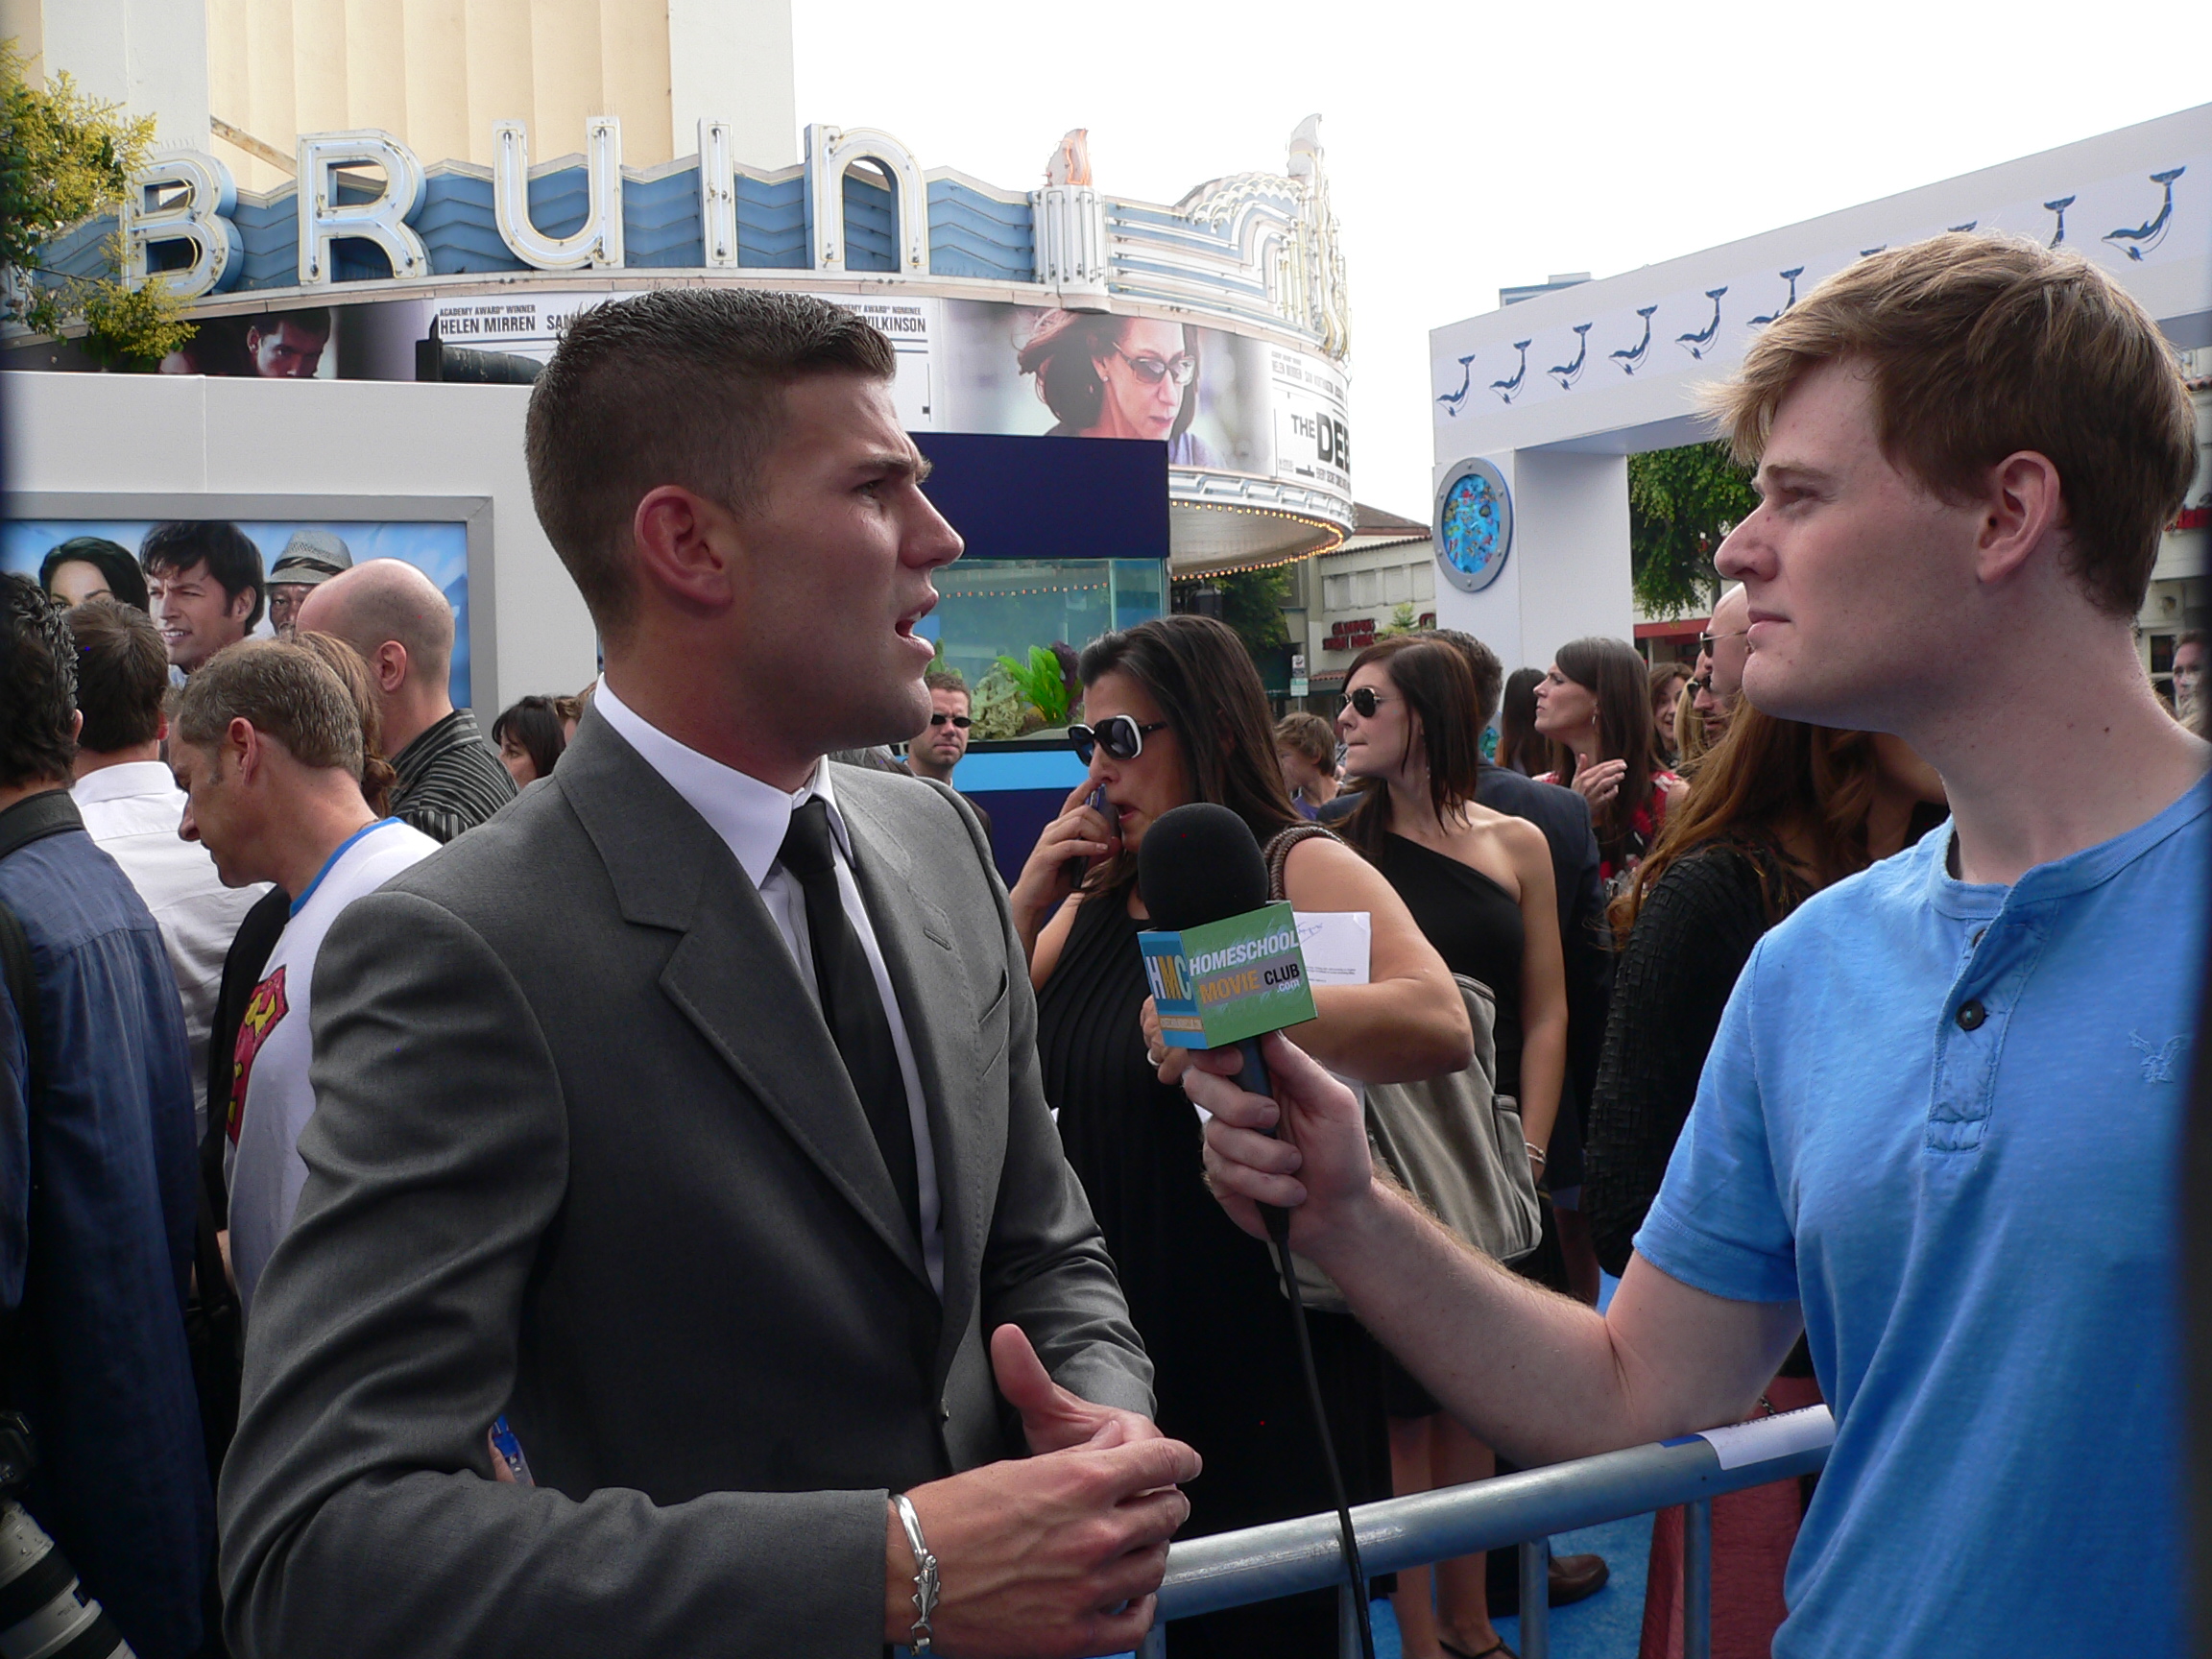 Nathan interviewing actor Austin Stowell, on the Red Carpet of Dolphin Tale